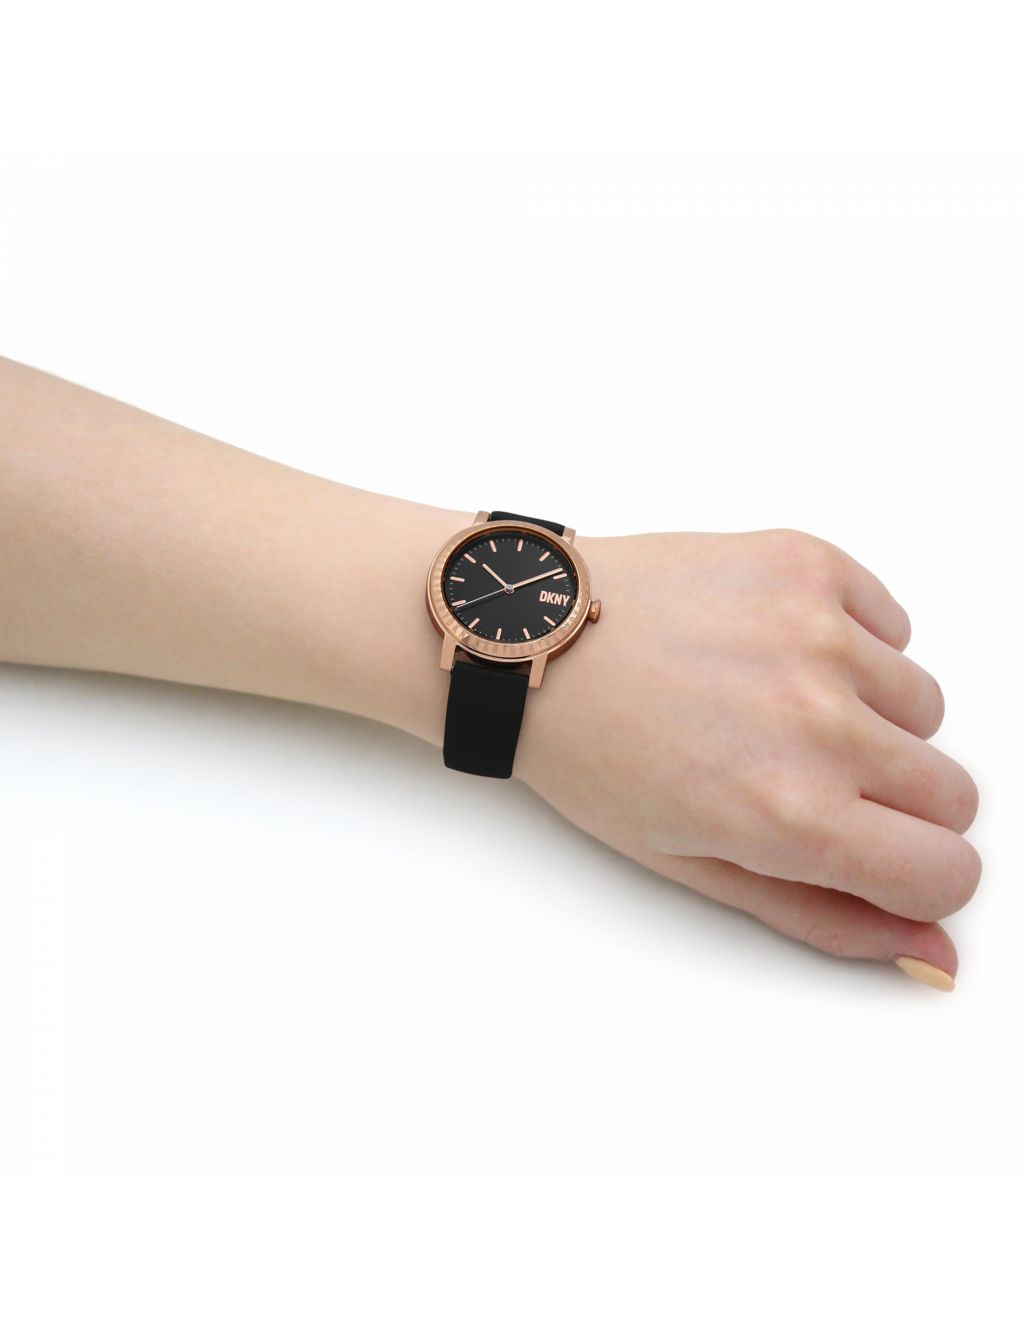 DKNY 7th Avenue Black Leather Watch image 9